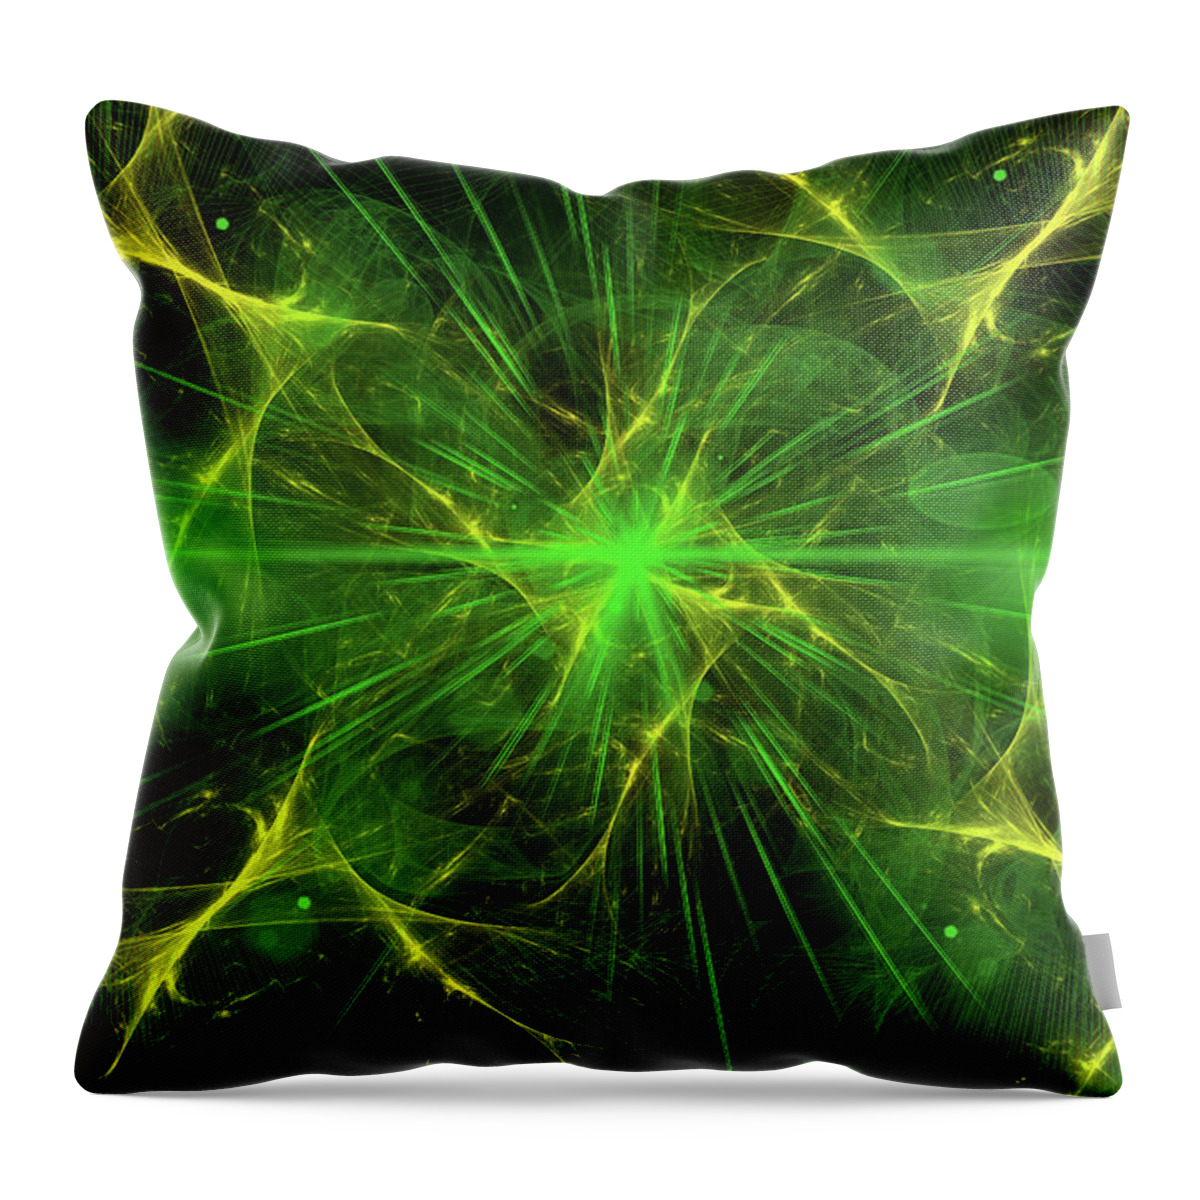 Image Throw Pillow featuring the digital art Image Design Green Fantasy by Sandra J's